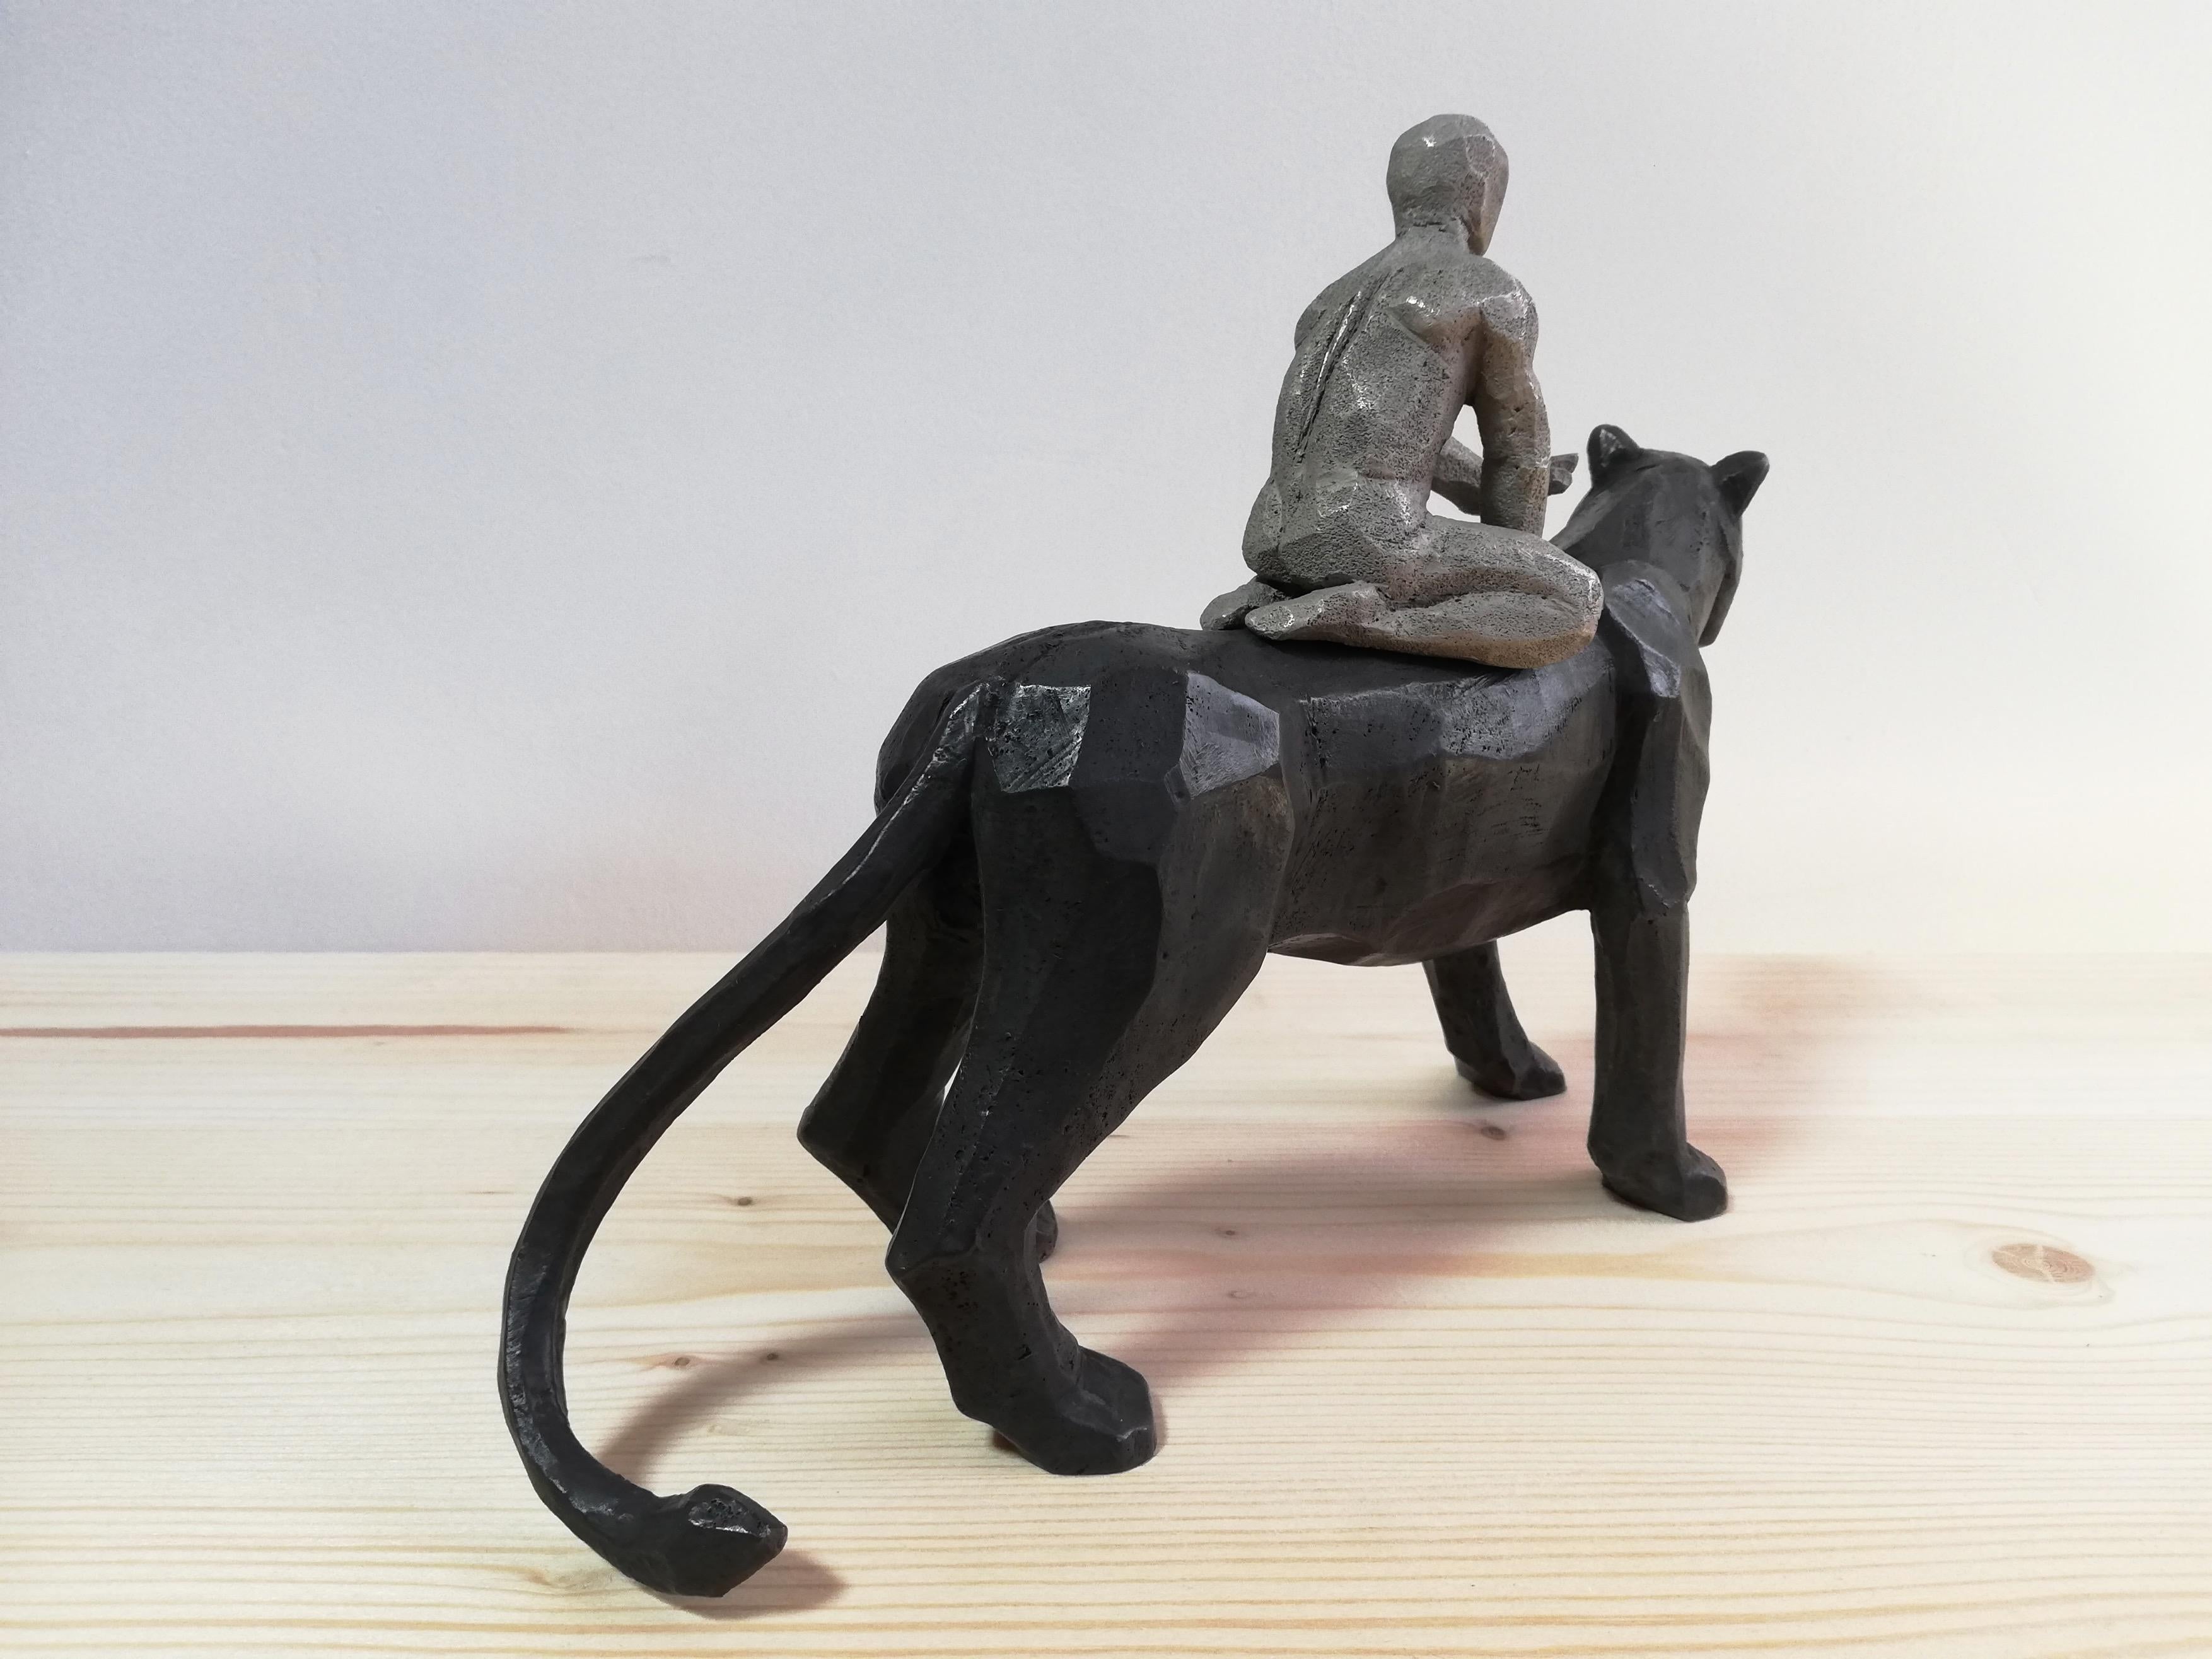 Passeur d'Ames bronze sculpture of a boy riding on a black panther's back  - Contemporary Sculpture by Cyrille André